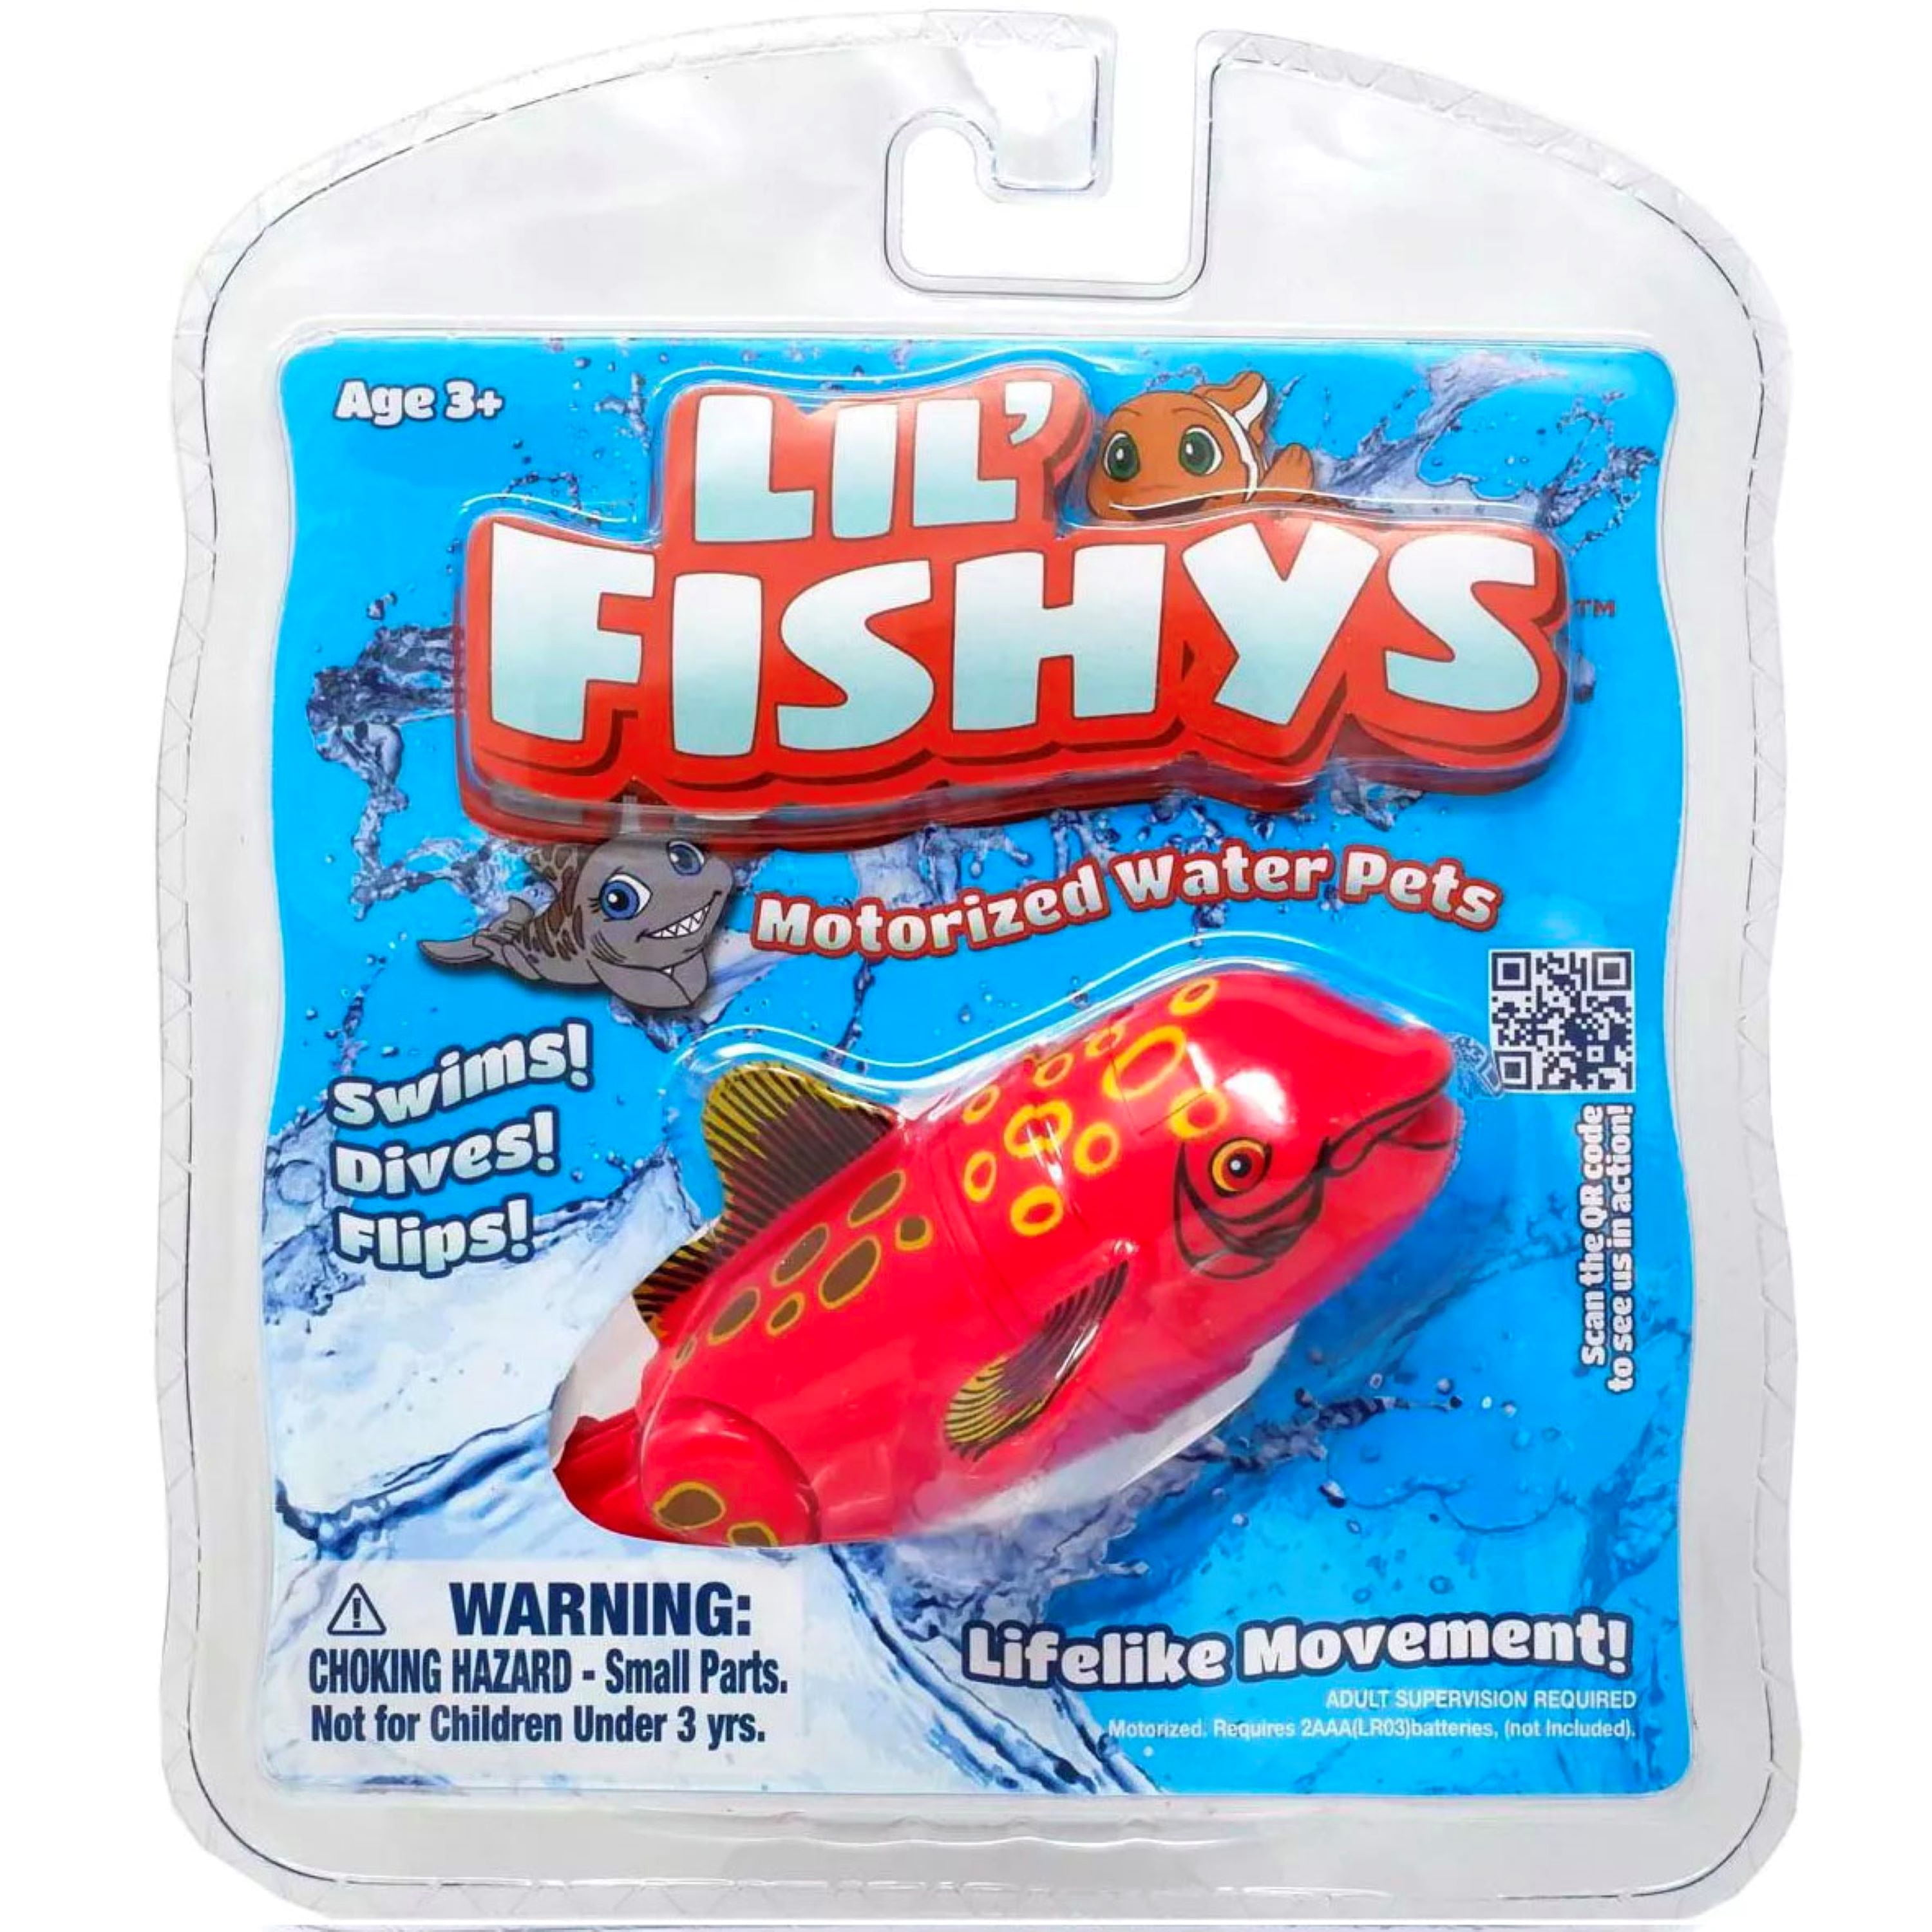 Toy Pet Gift Play Lil Fishy Jelly Fish Beardy Electronic Fish Aquarium Ages 3 